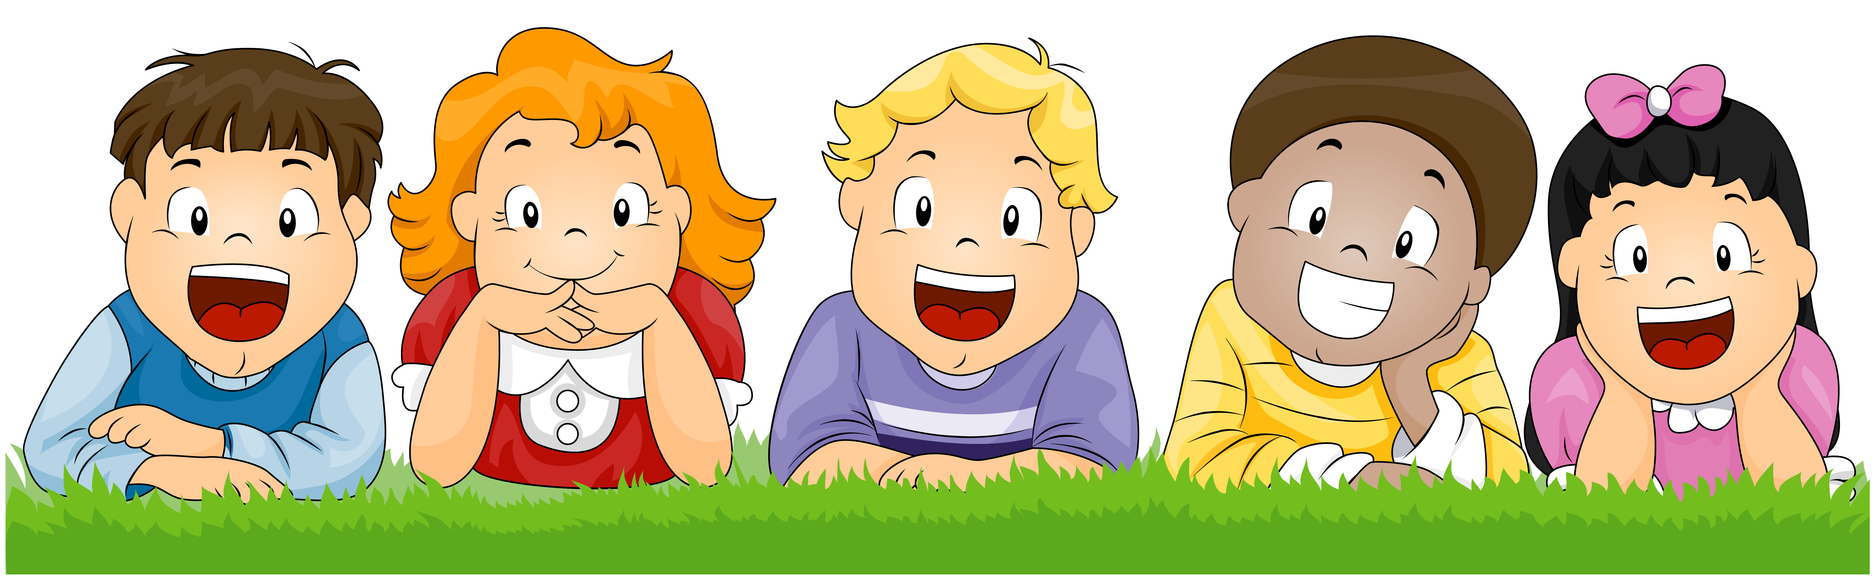 Free kids clipart.